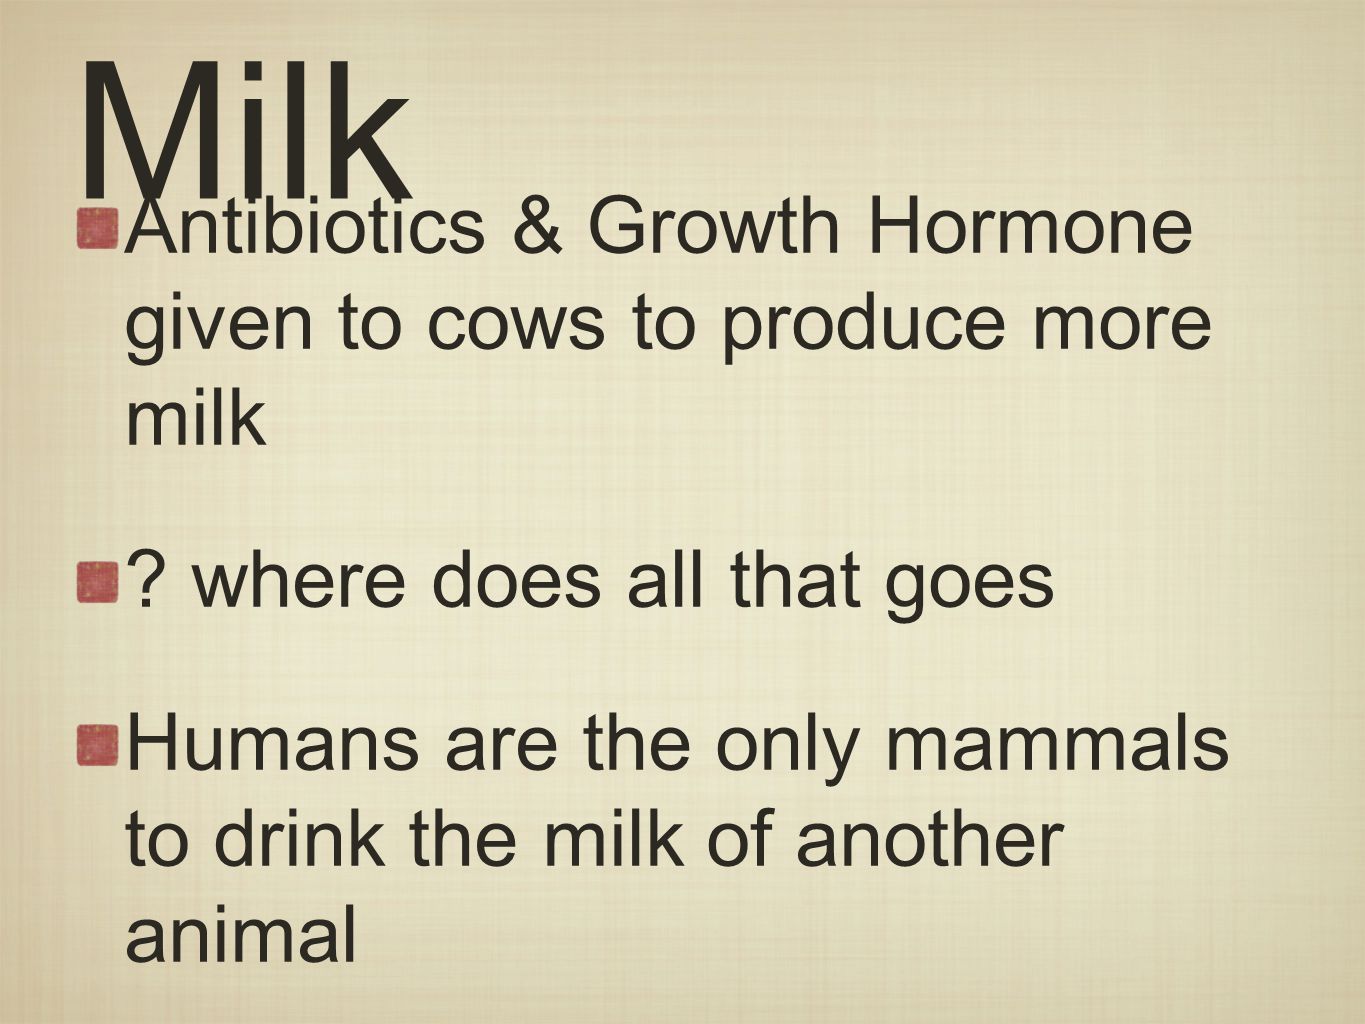 Milk Antibiotics & Growth Hormone given to cows to produce more milk .